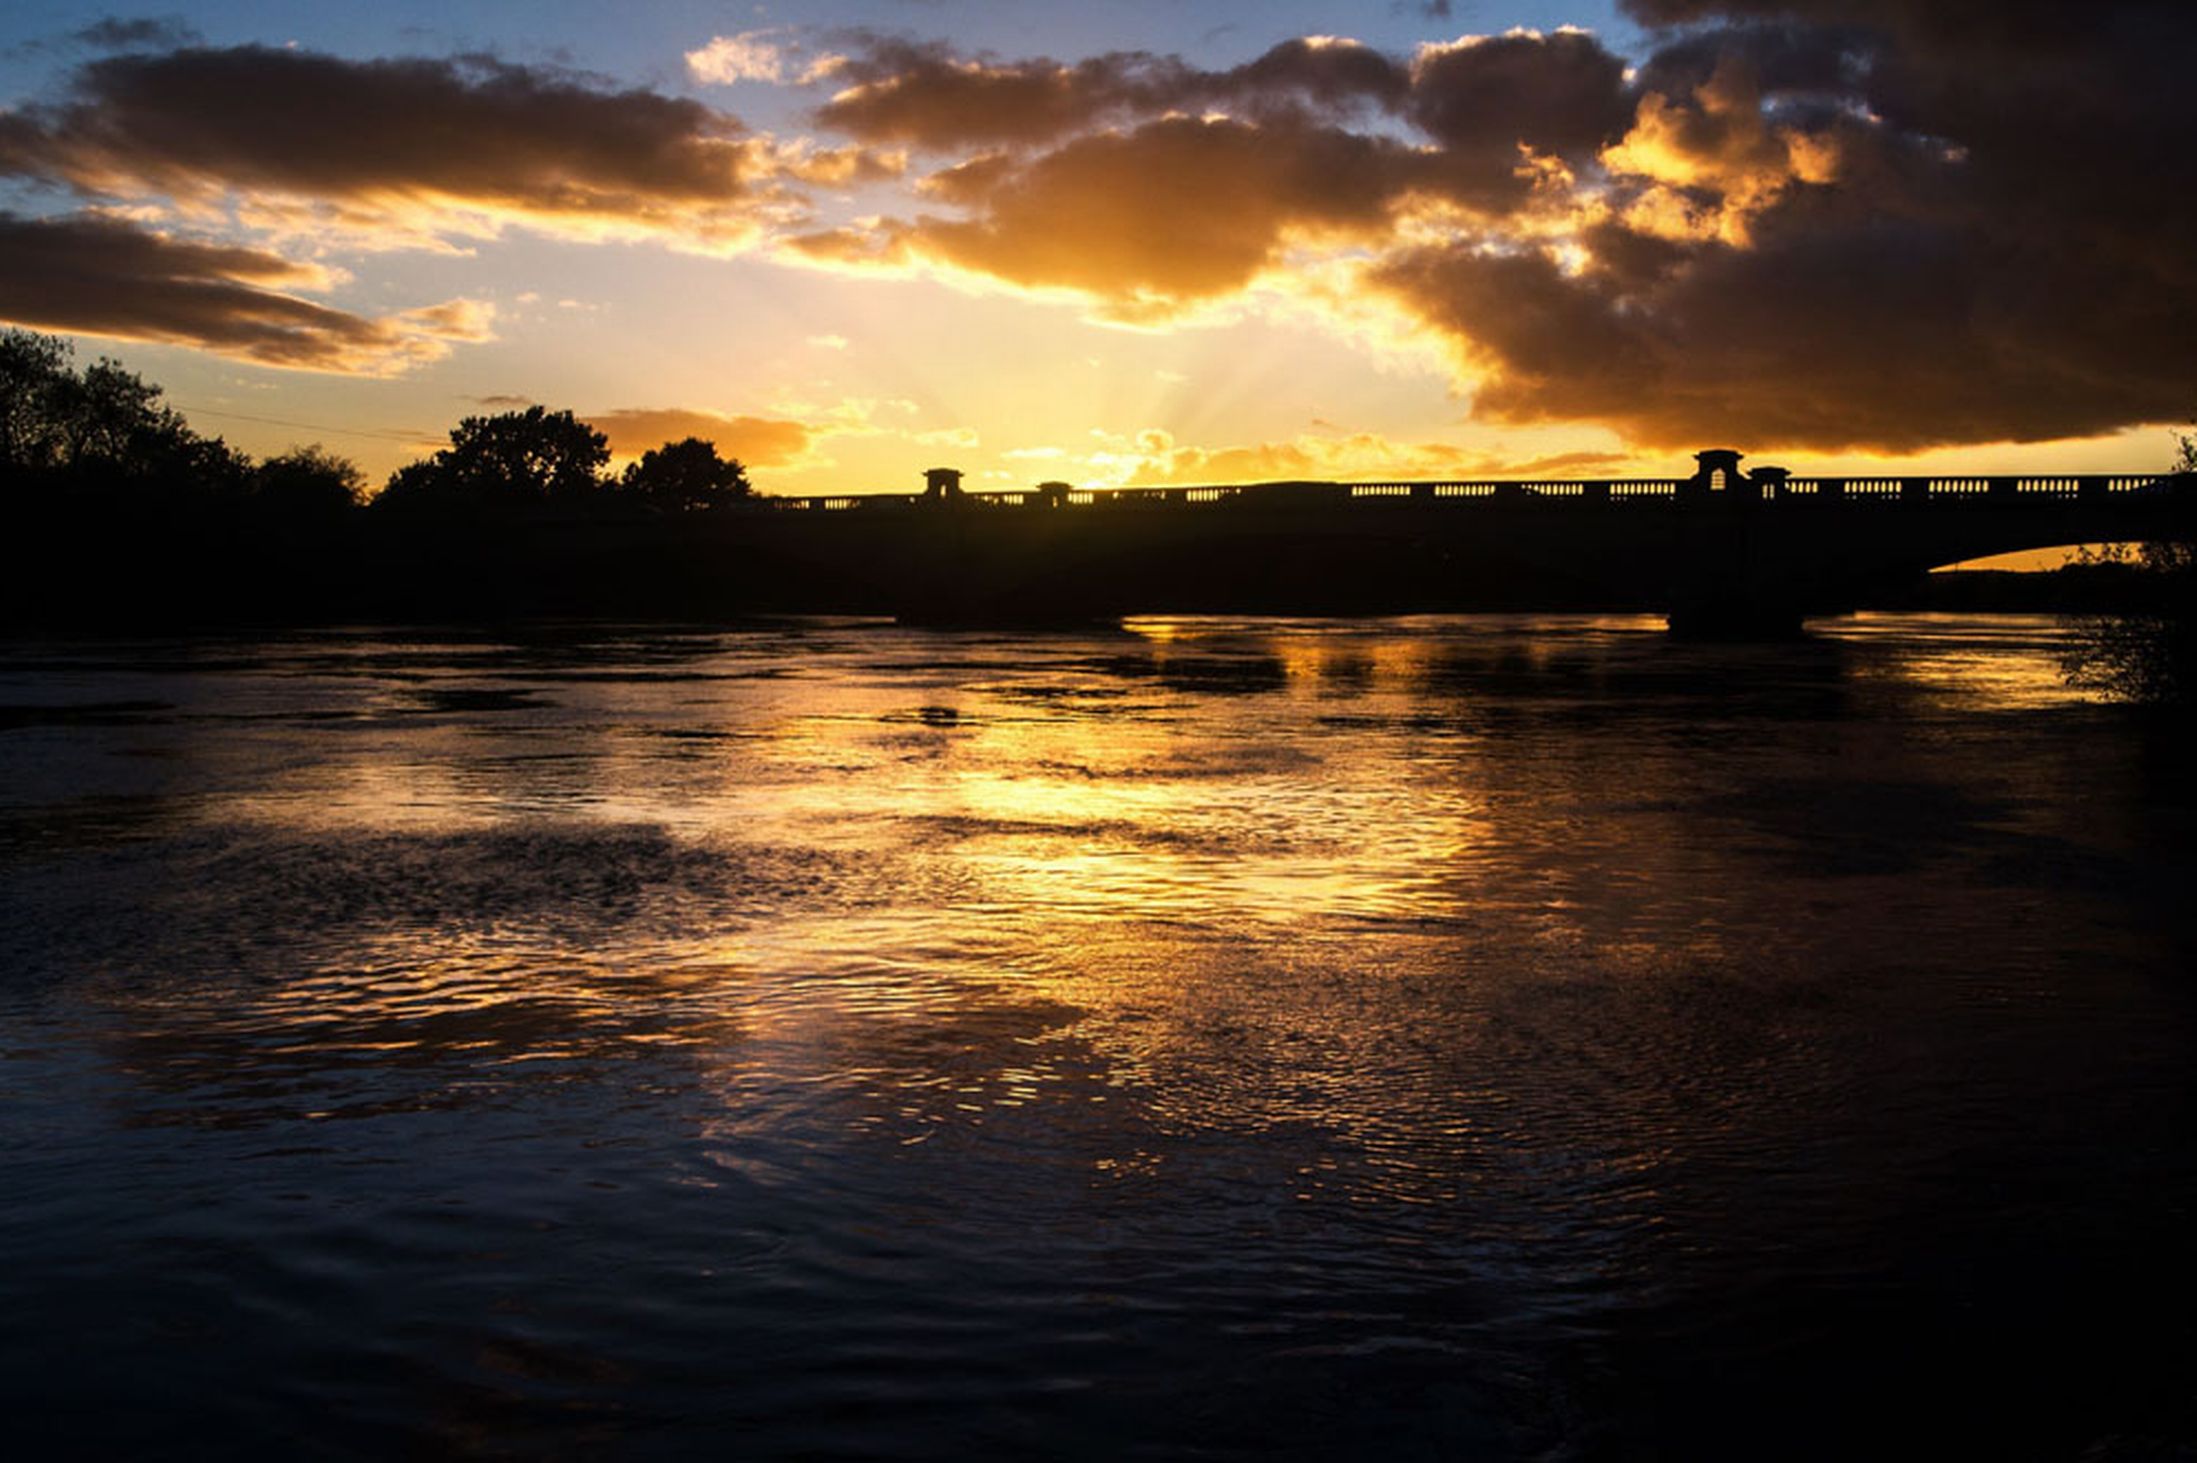 The-sun-sets-over-the-River-Trent-at-Gunthorpe-Nottingham-23rd-October-2641158